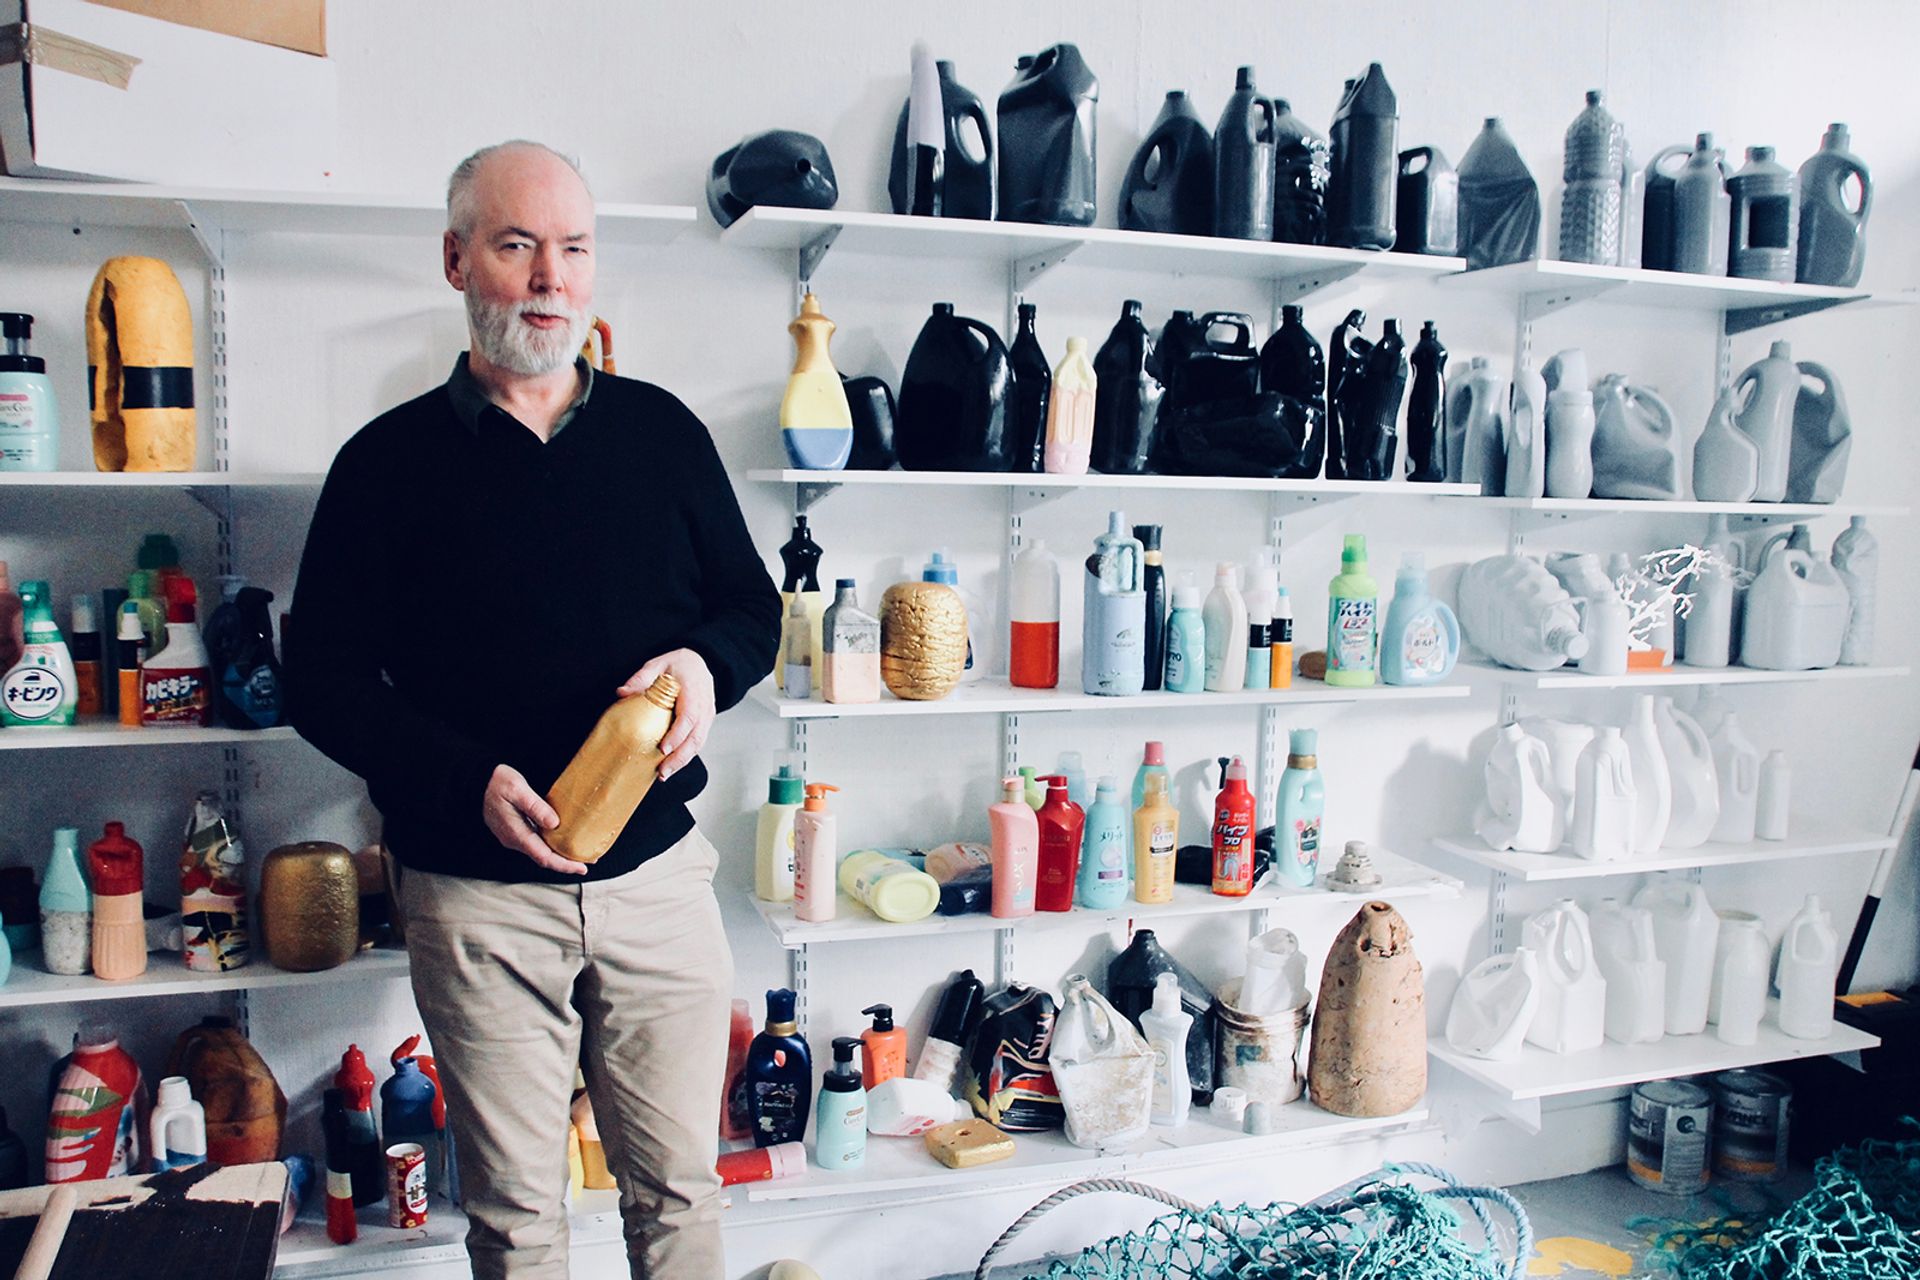 Douglas Coupland in his studio with some of of the hundreds of plastic objects he has collected over the years Hadani Ditmars